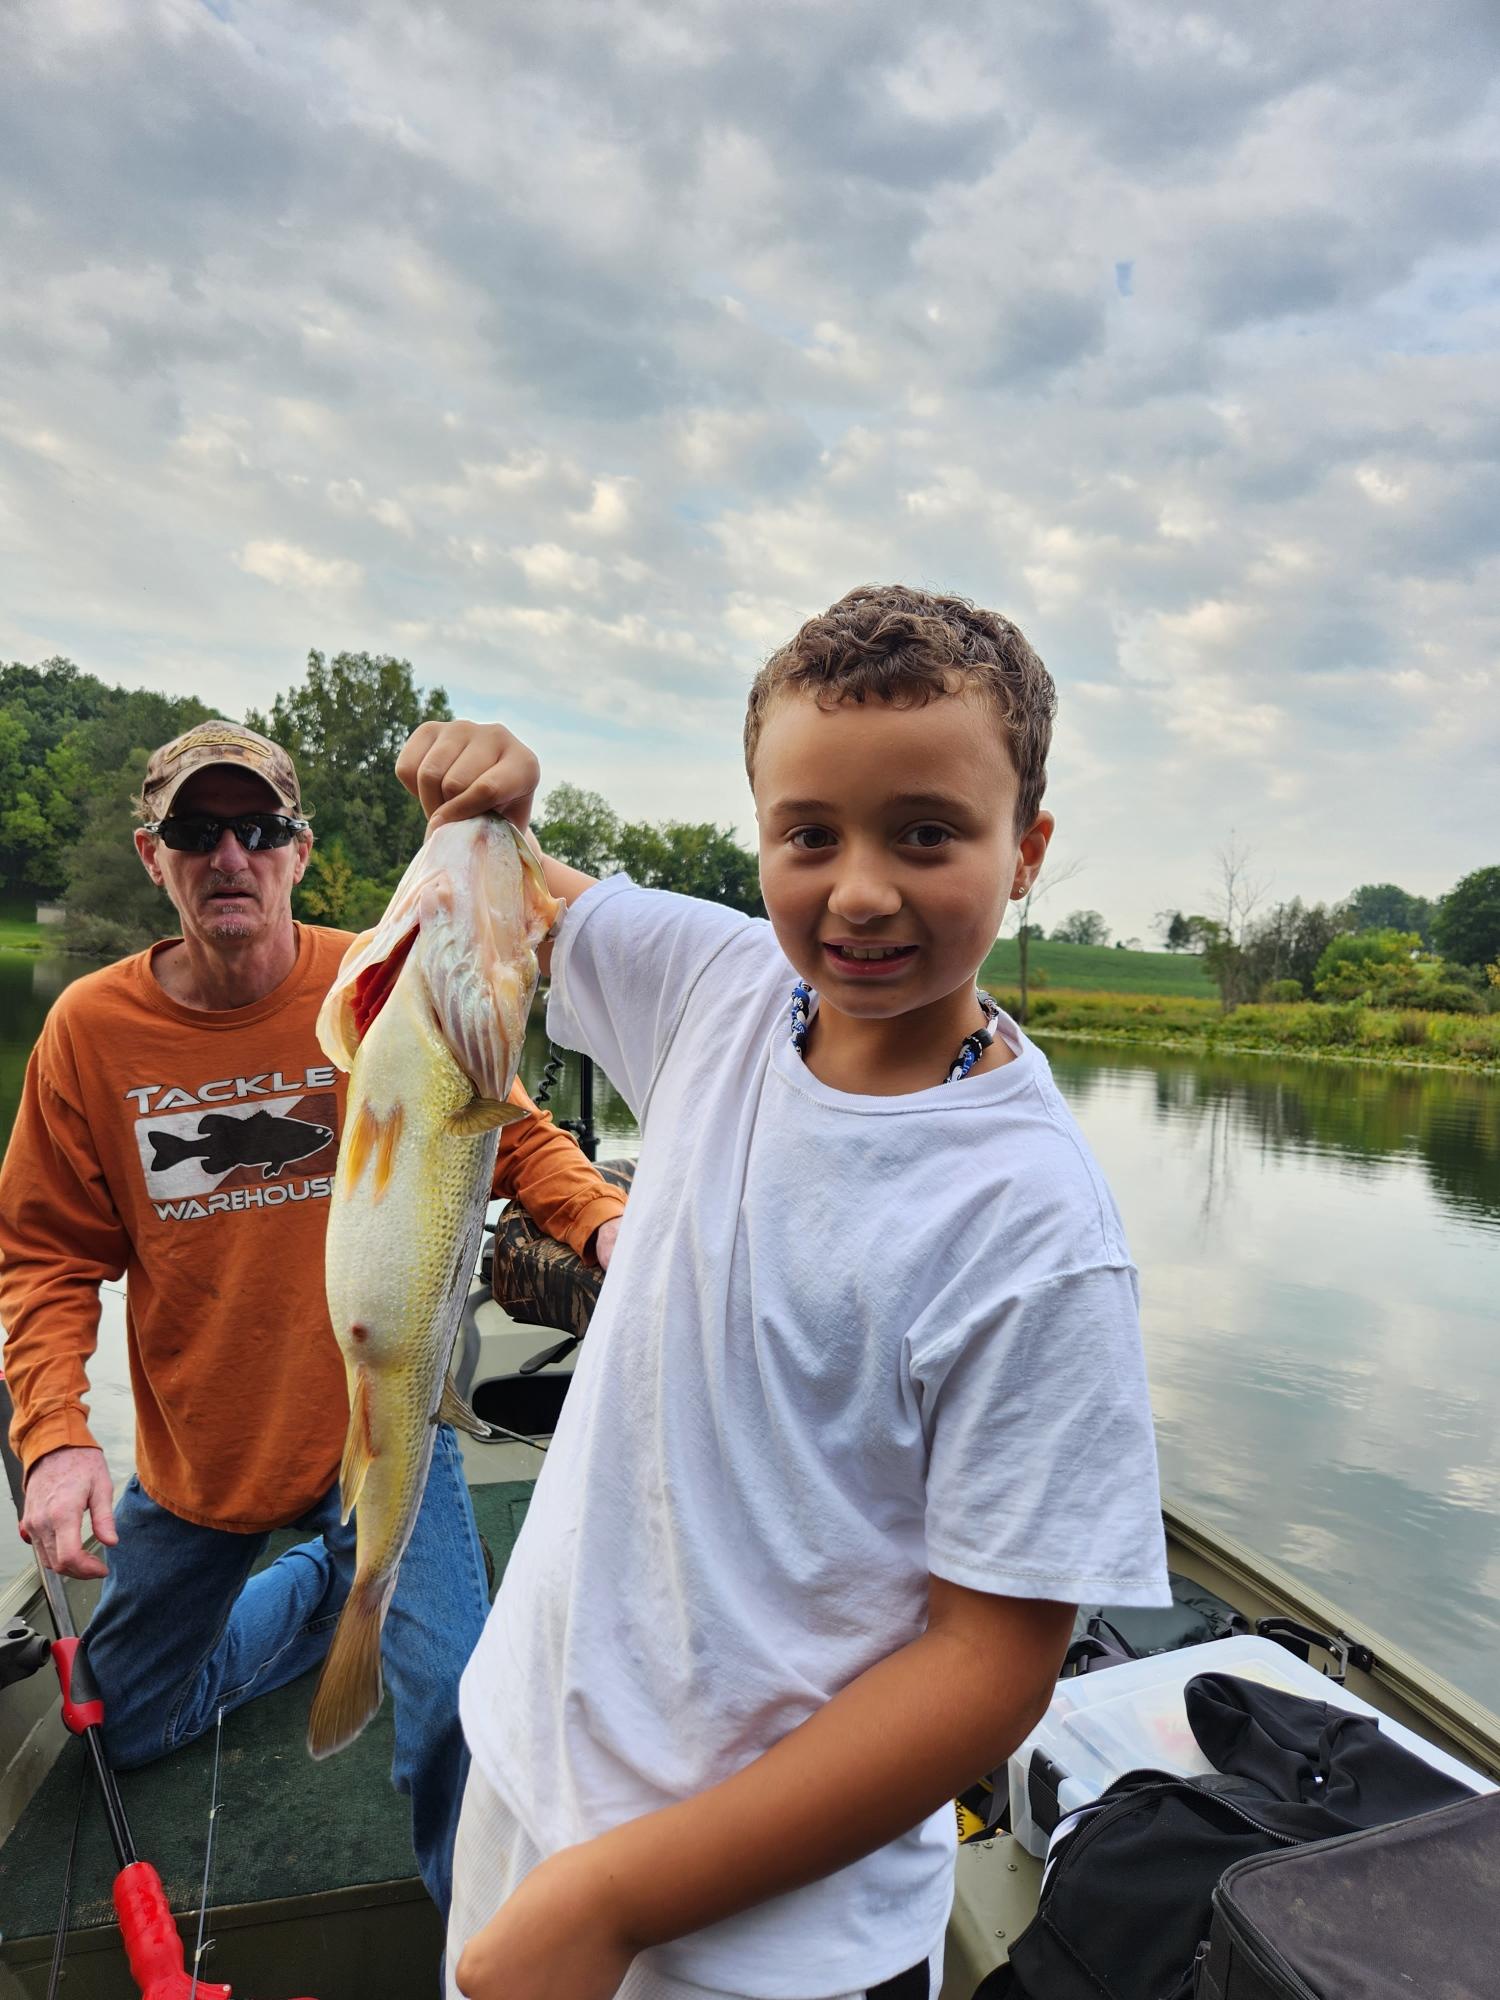 Maumee river report- 22 sept 2022- First day of fall